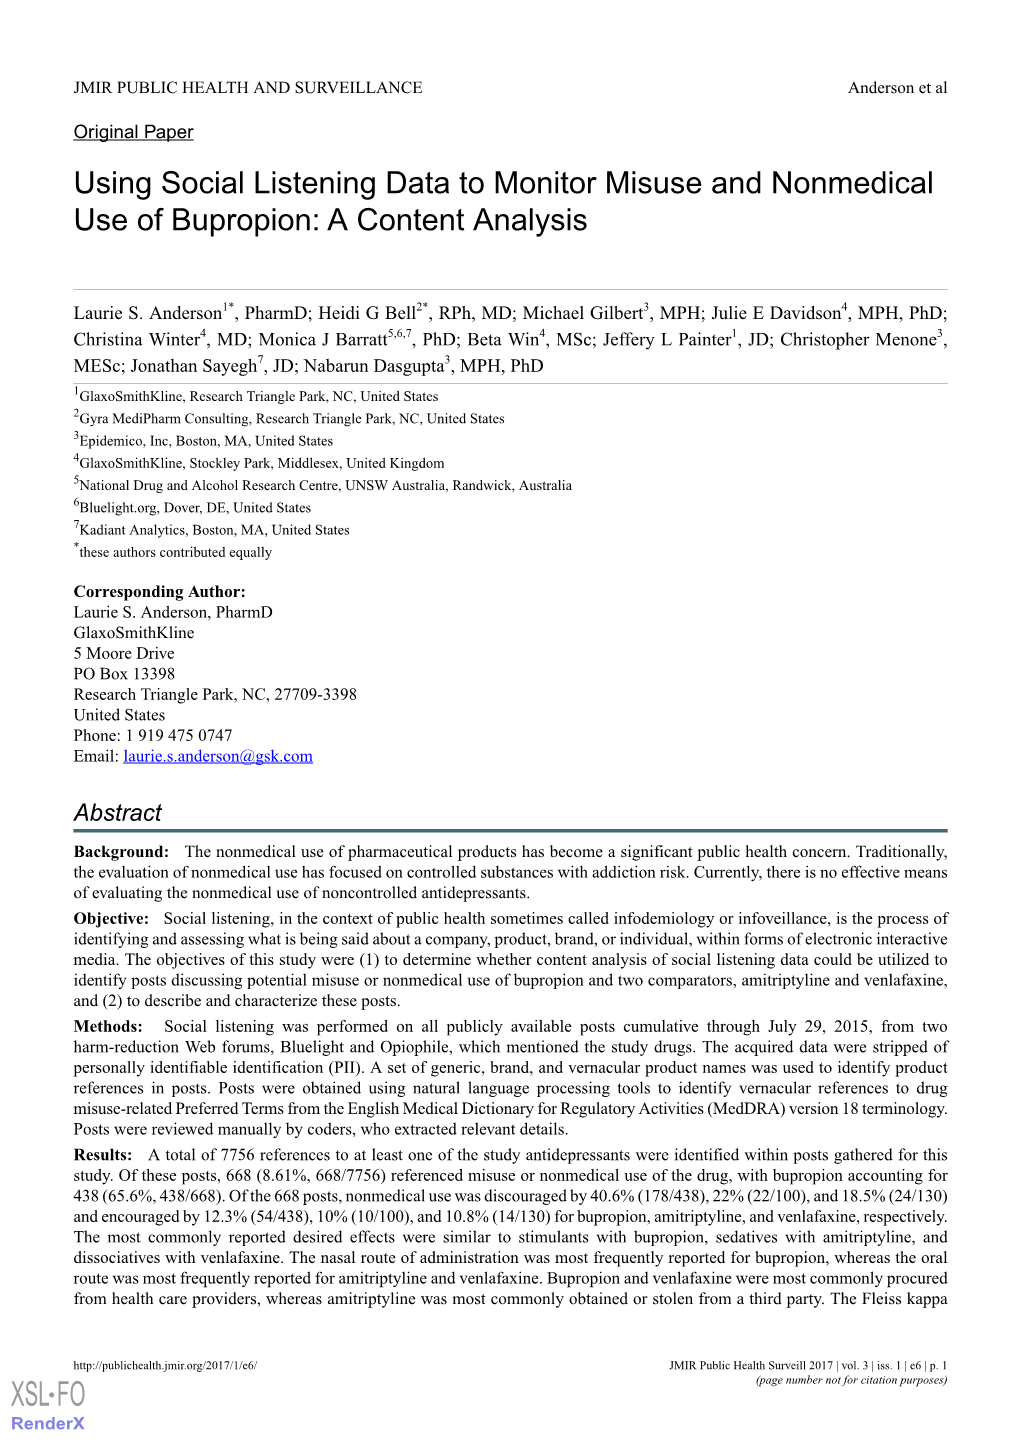 Using Social Listening Data to Monitor Misuse and Nonmedical Use of Bupropion: a Content Analysis